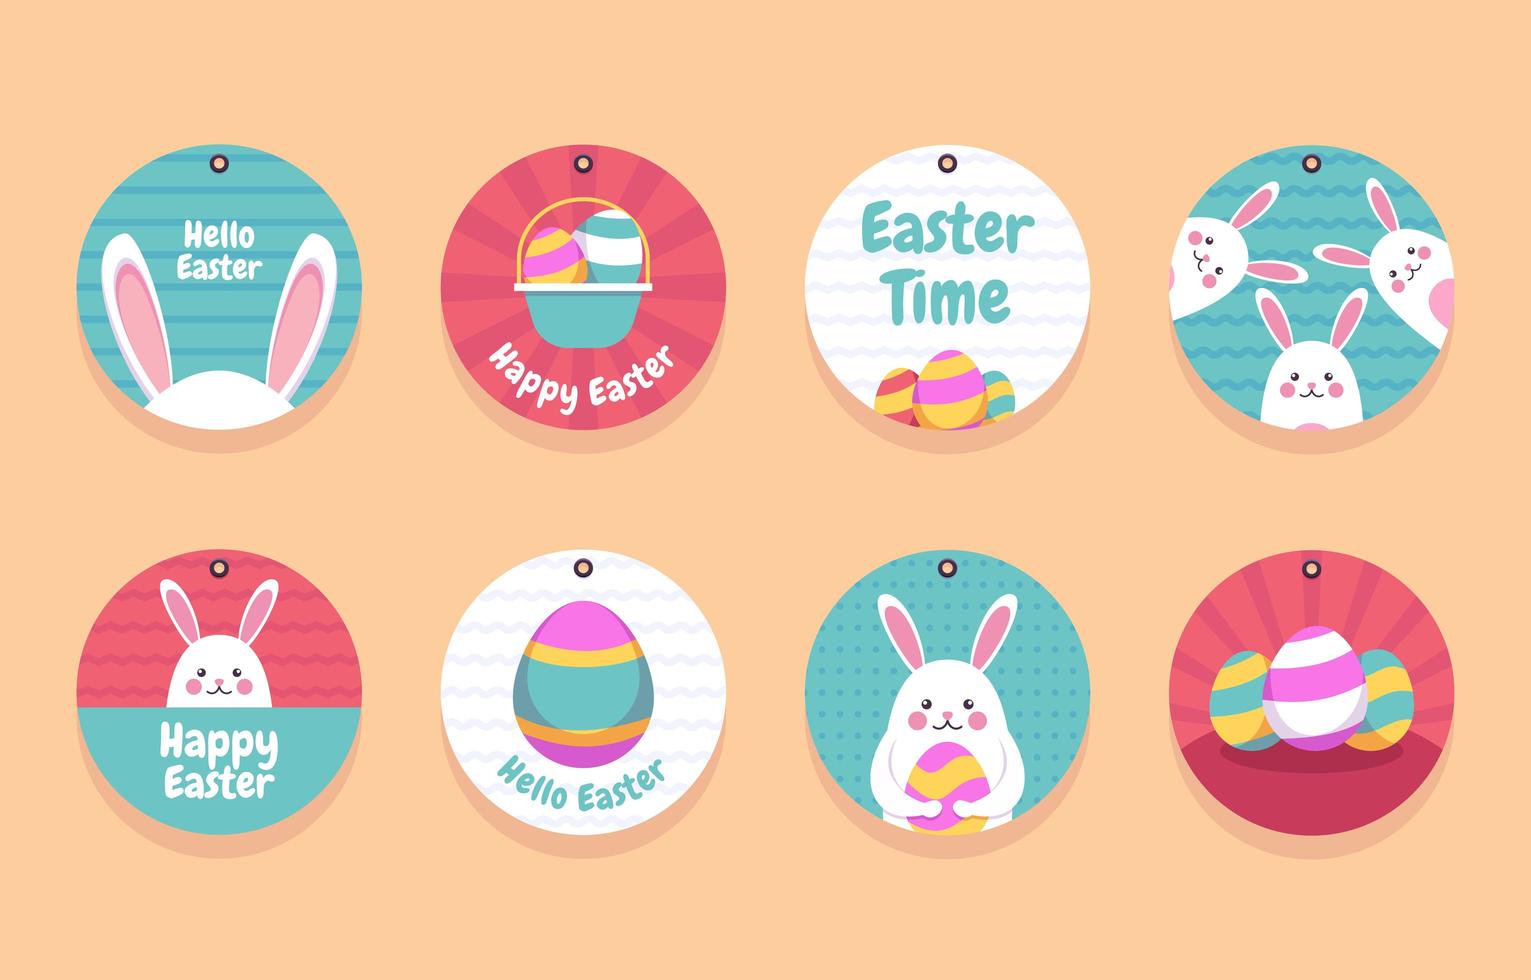 Cute Easter Gift Tag Collection vector